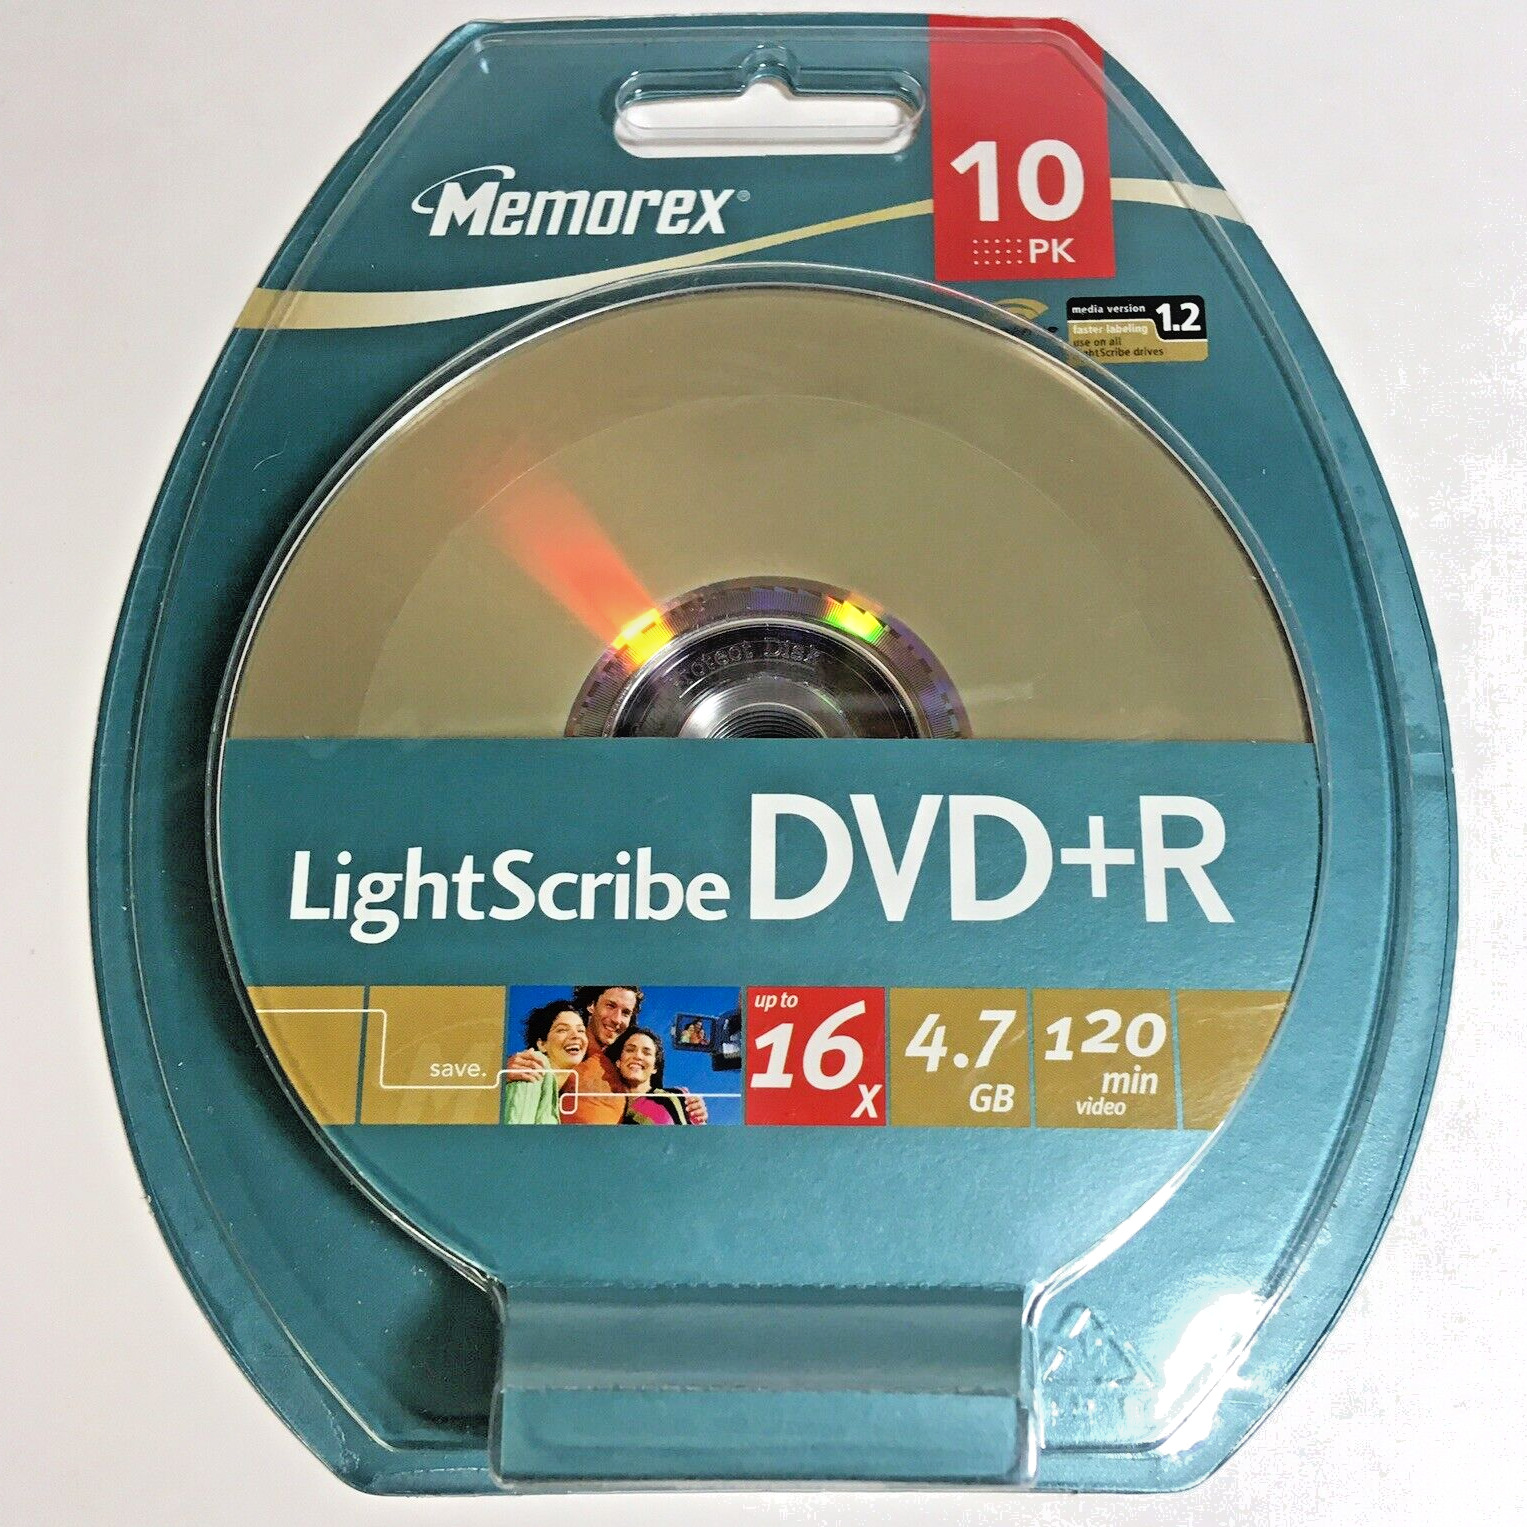 Memorex LightScribe DVD+R Recordable 10 Pack 16x 4.7 GB 120 min Factory Sealed